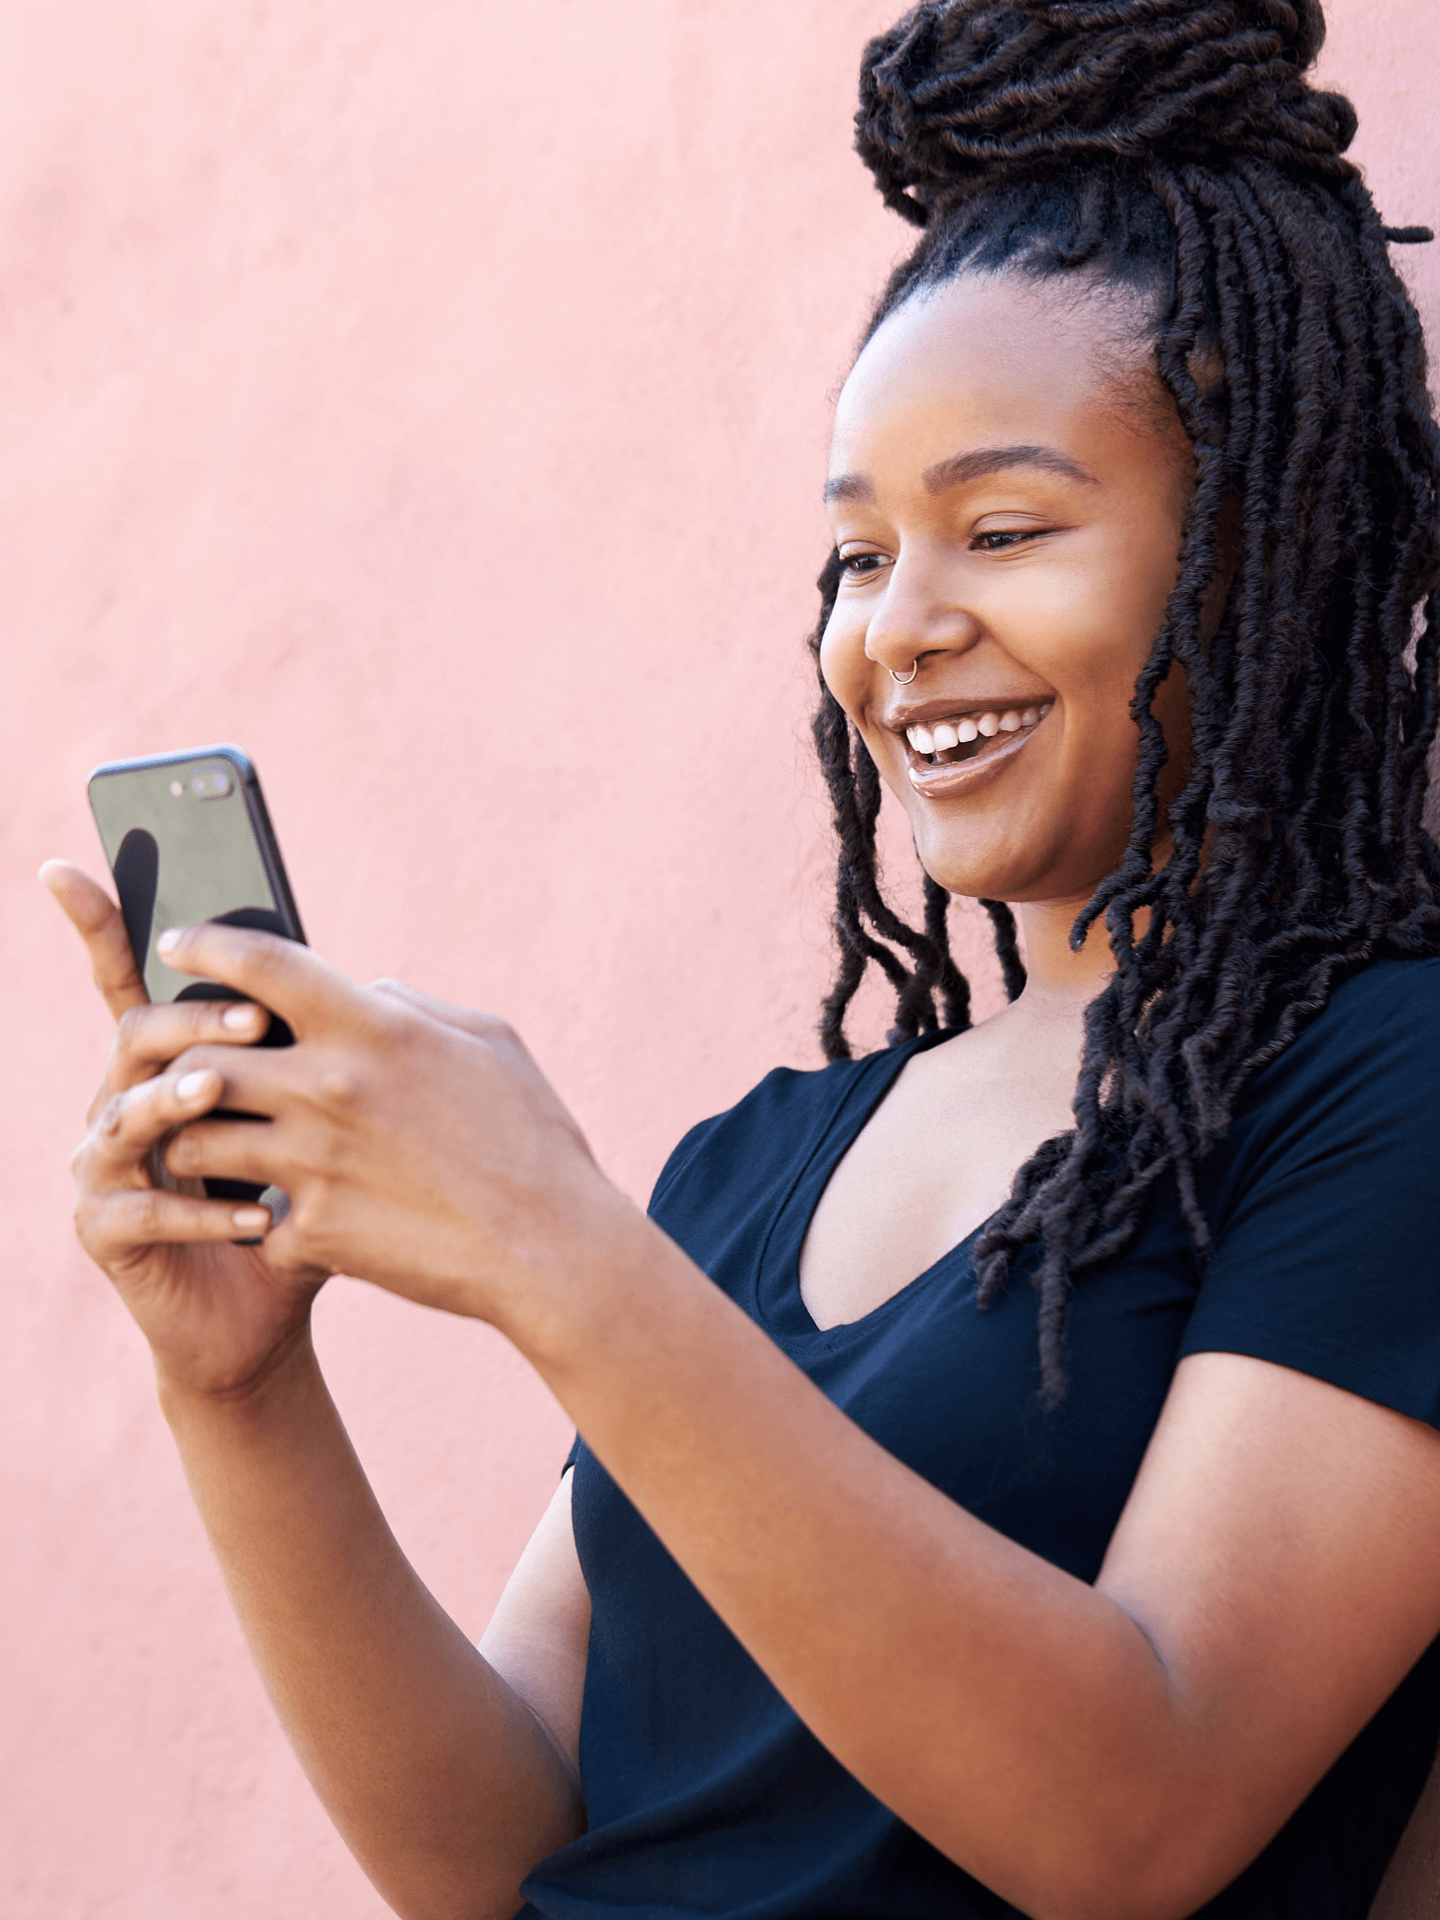 A woman smiling while using a smart phone